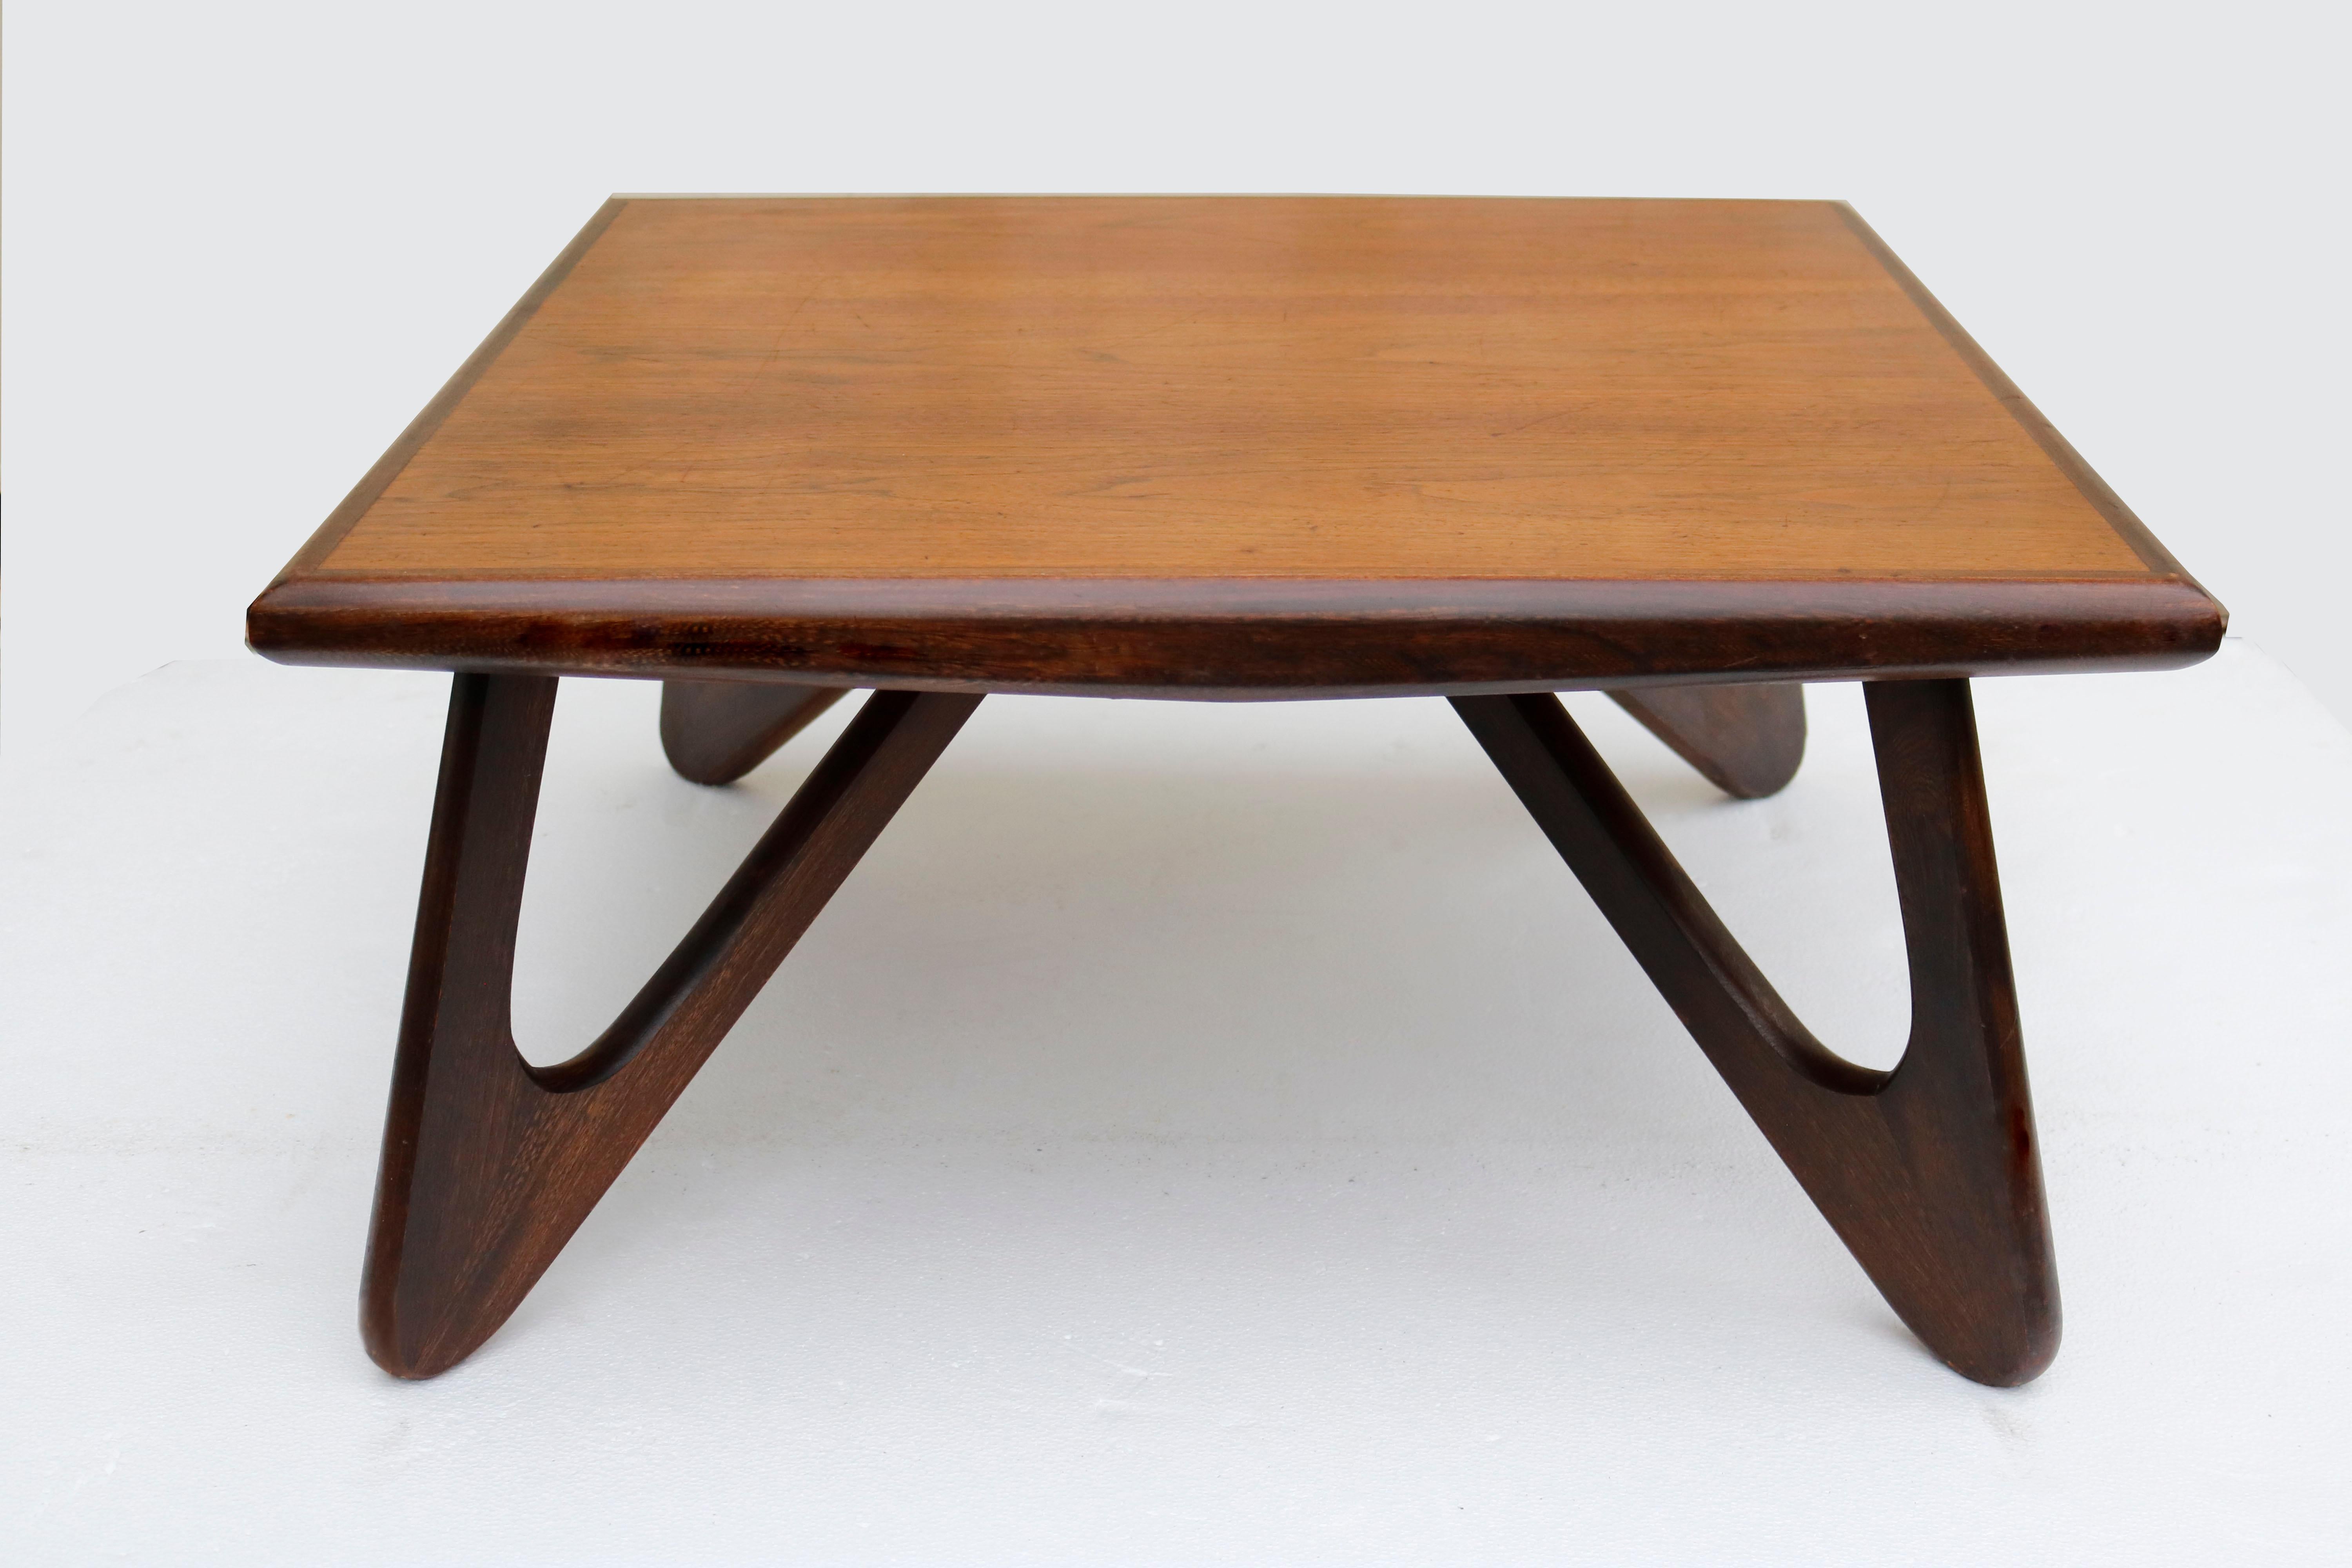 Walnut square coffee table with hairpins legs.